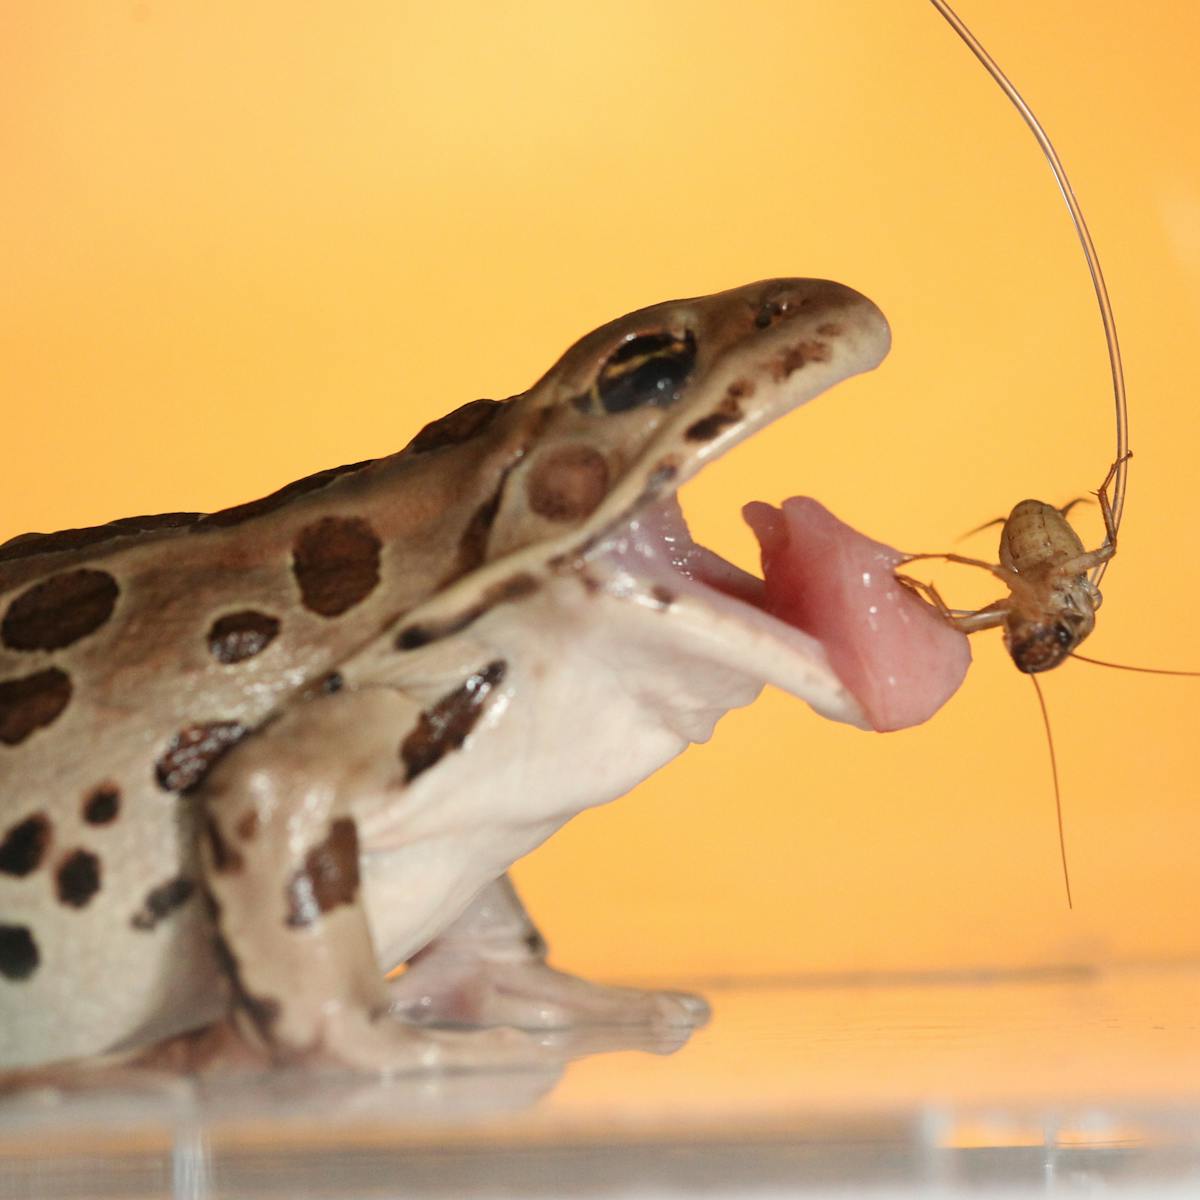 The frog tongue is a high-speed adhesive